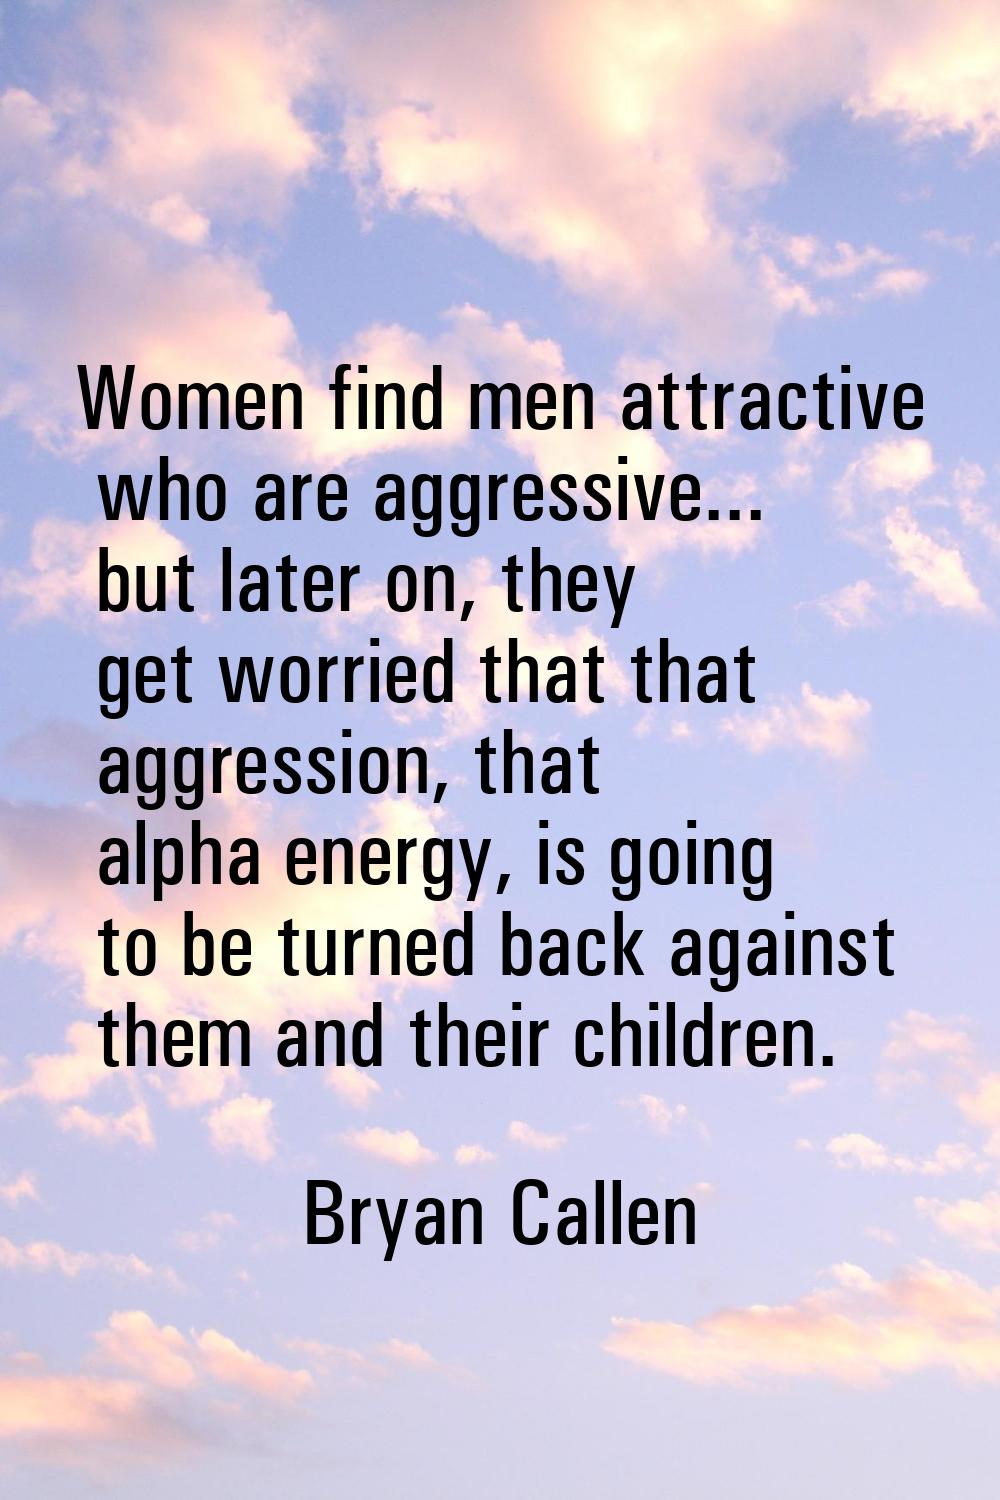 Women find men attractive who are aggressive... but later on, they get worried that that aggression